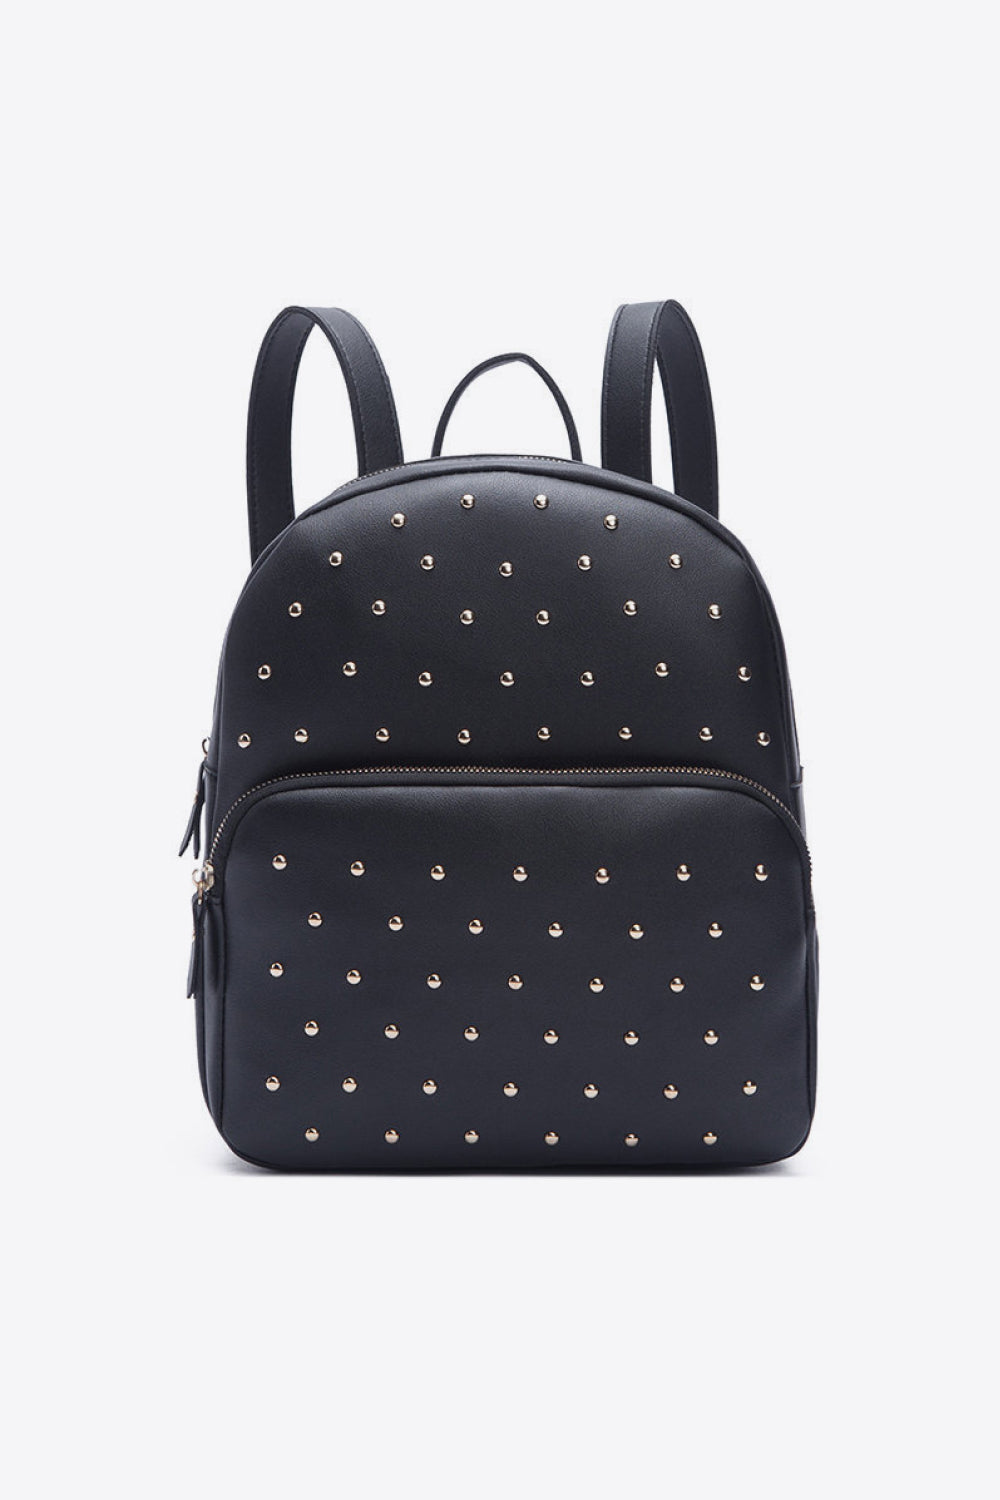 Studded PU Leather Backpack - Dash Trend